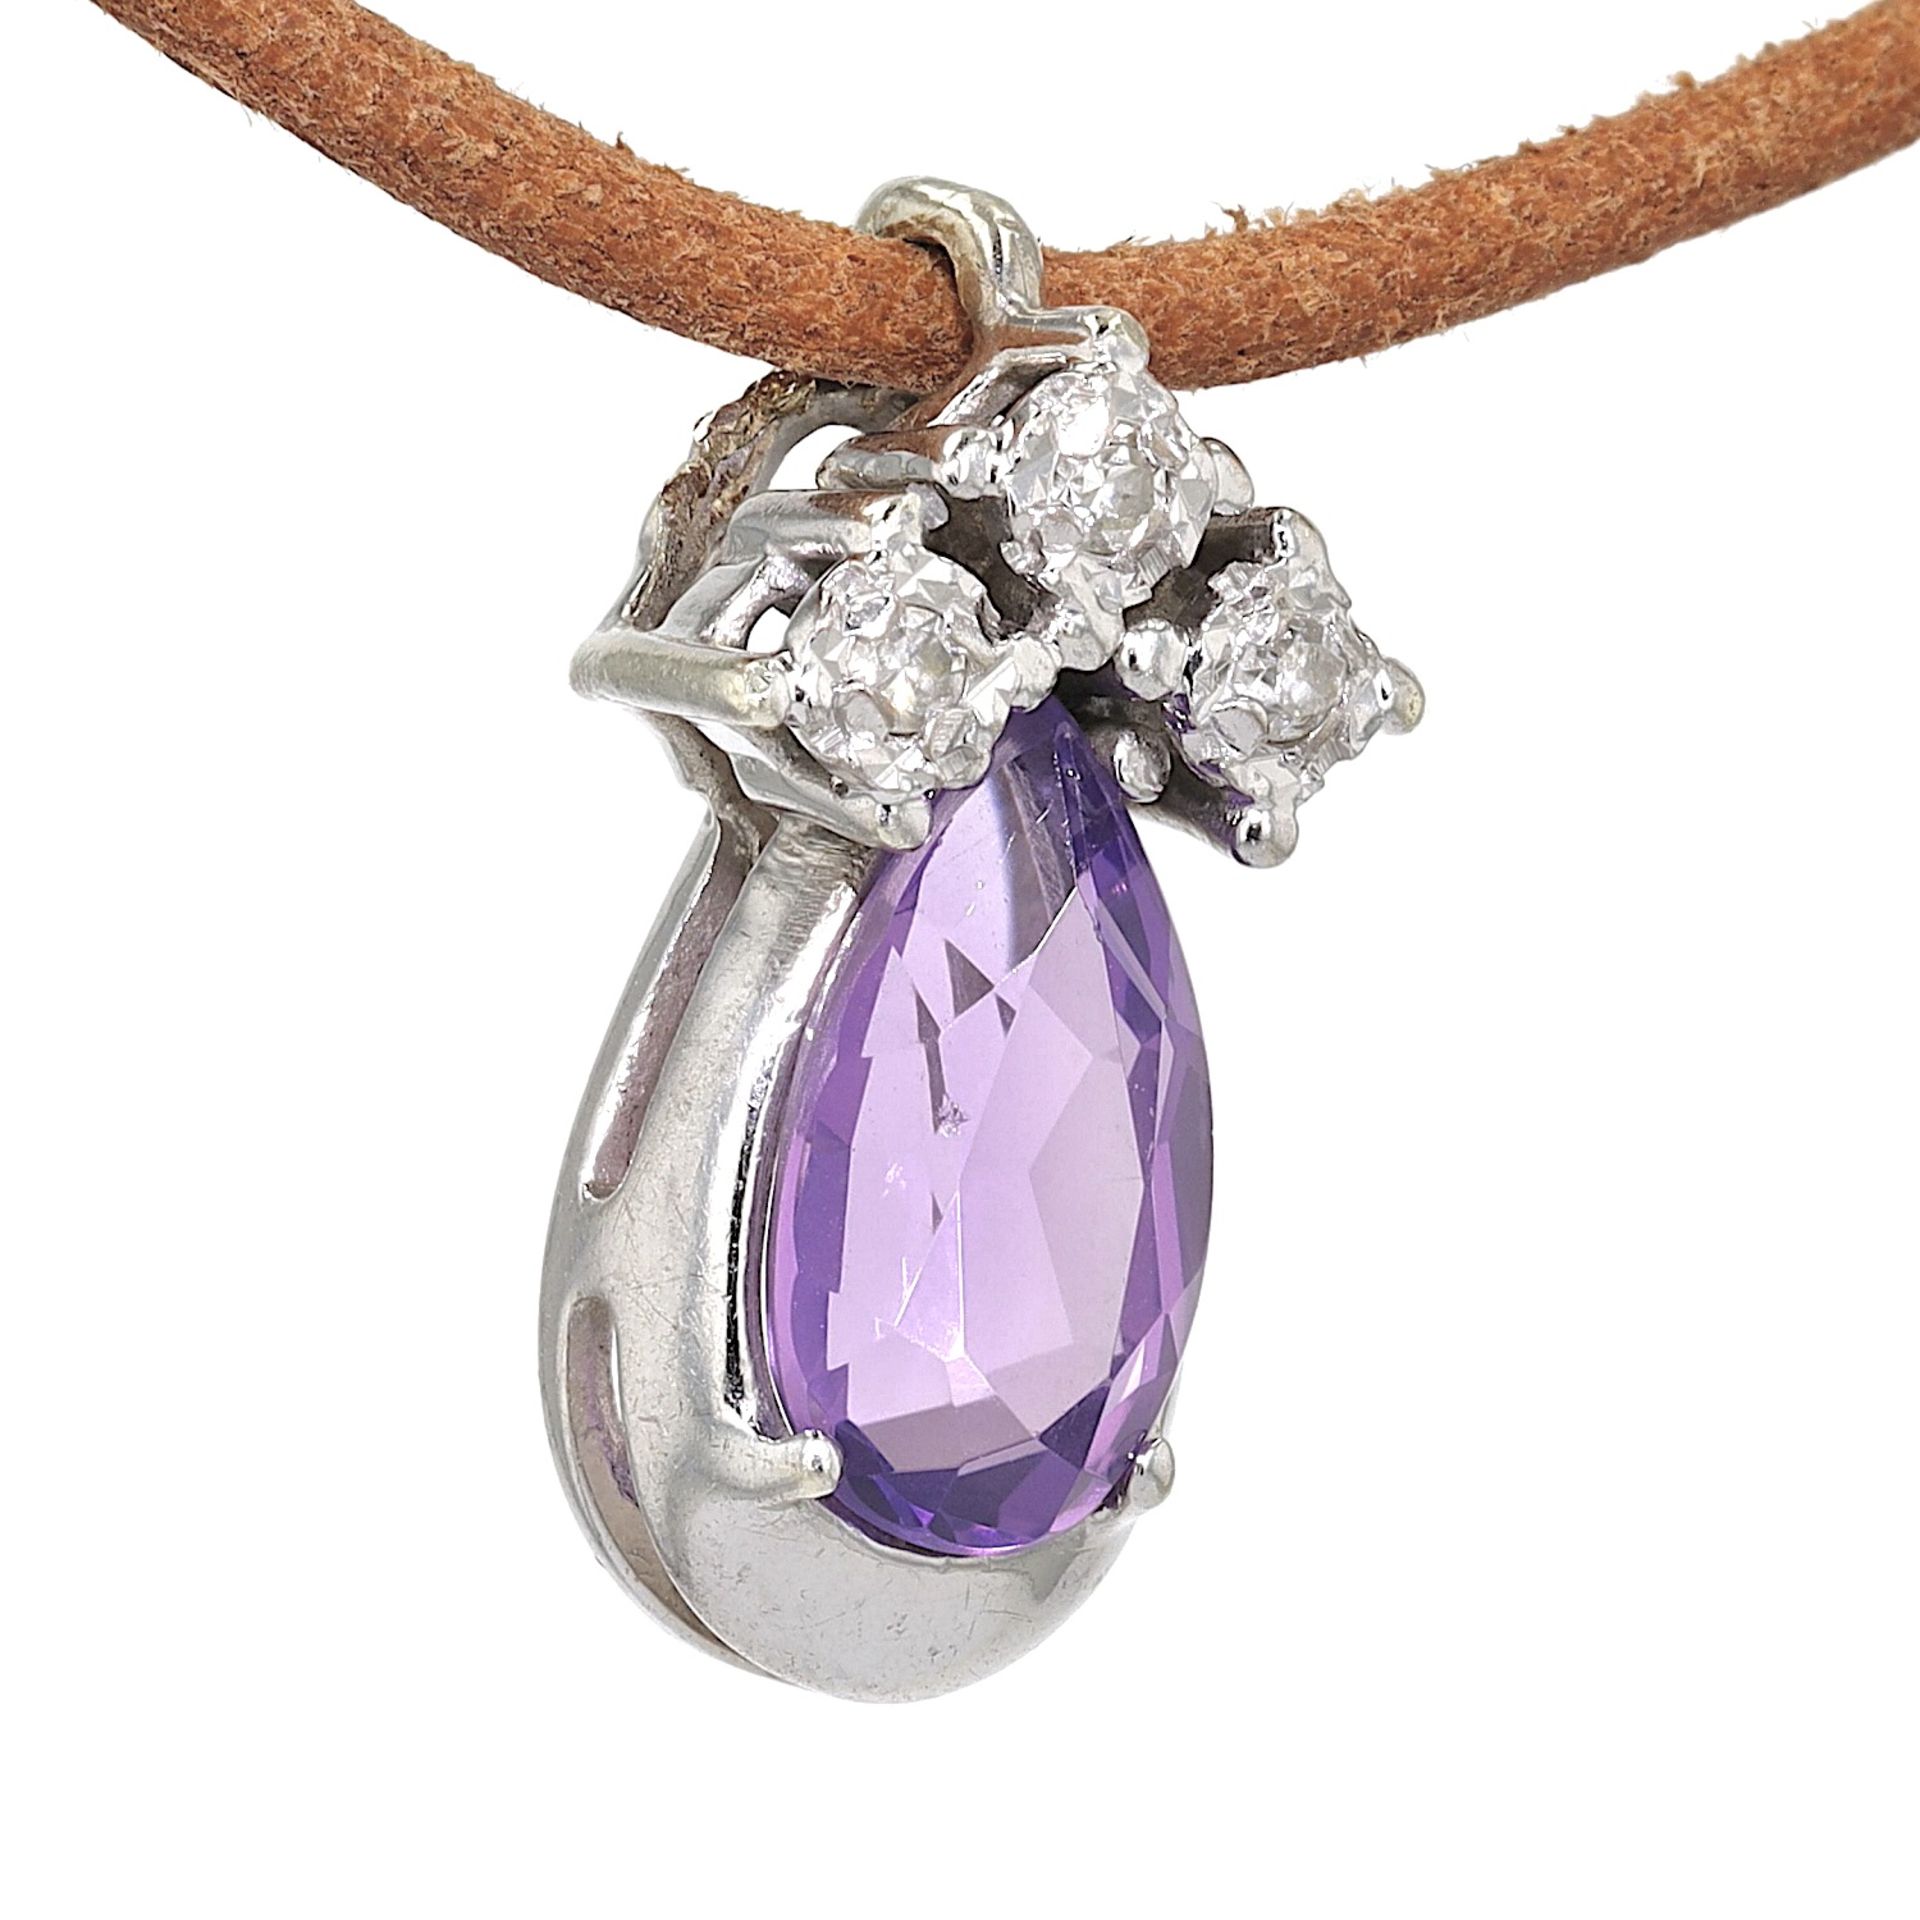 Pendant with amethyst and diamonds - Image 3 of 4